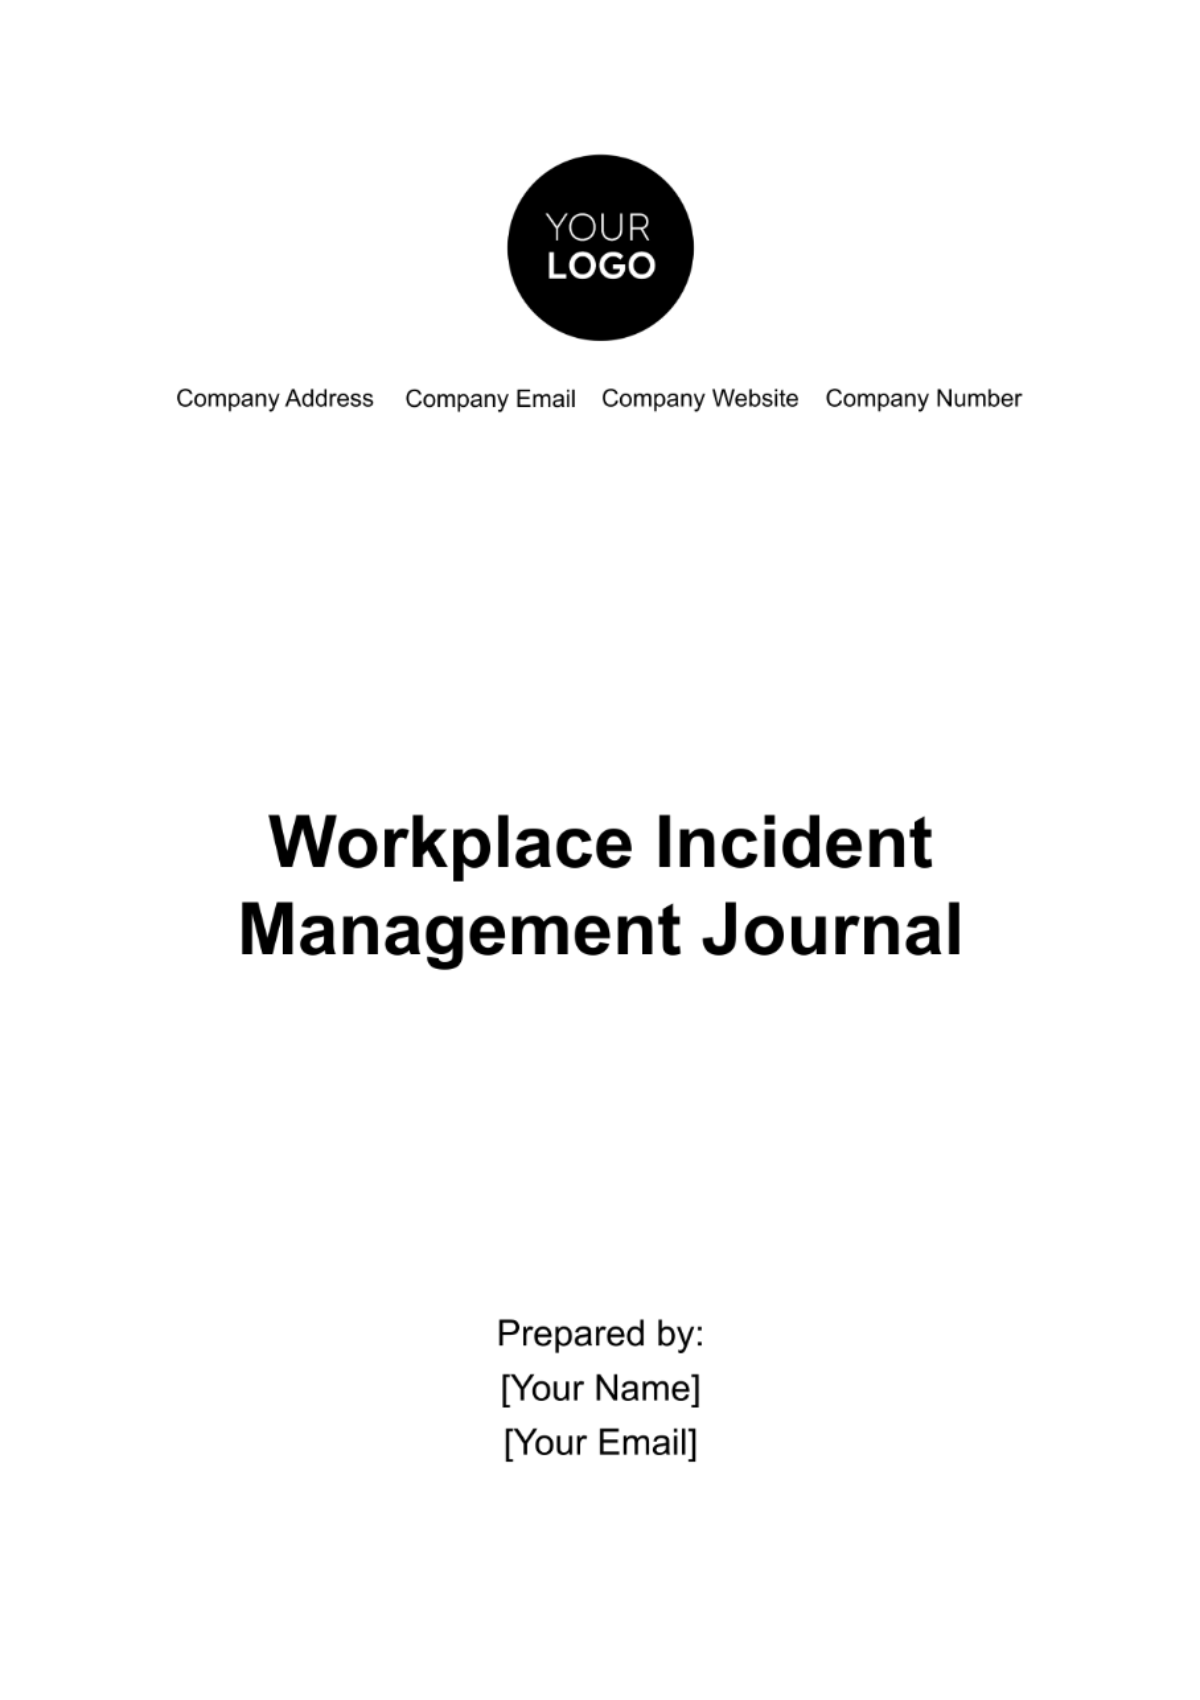 Workplace Incident Management Journal Template